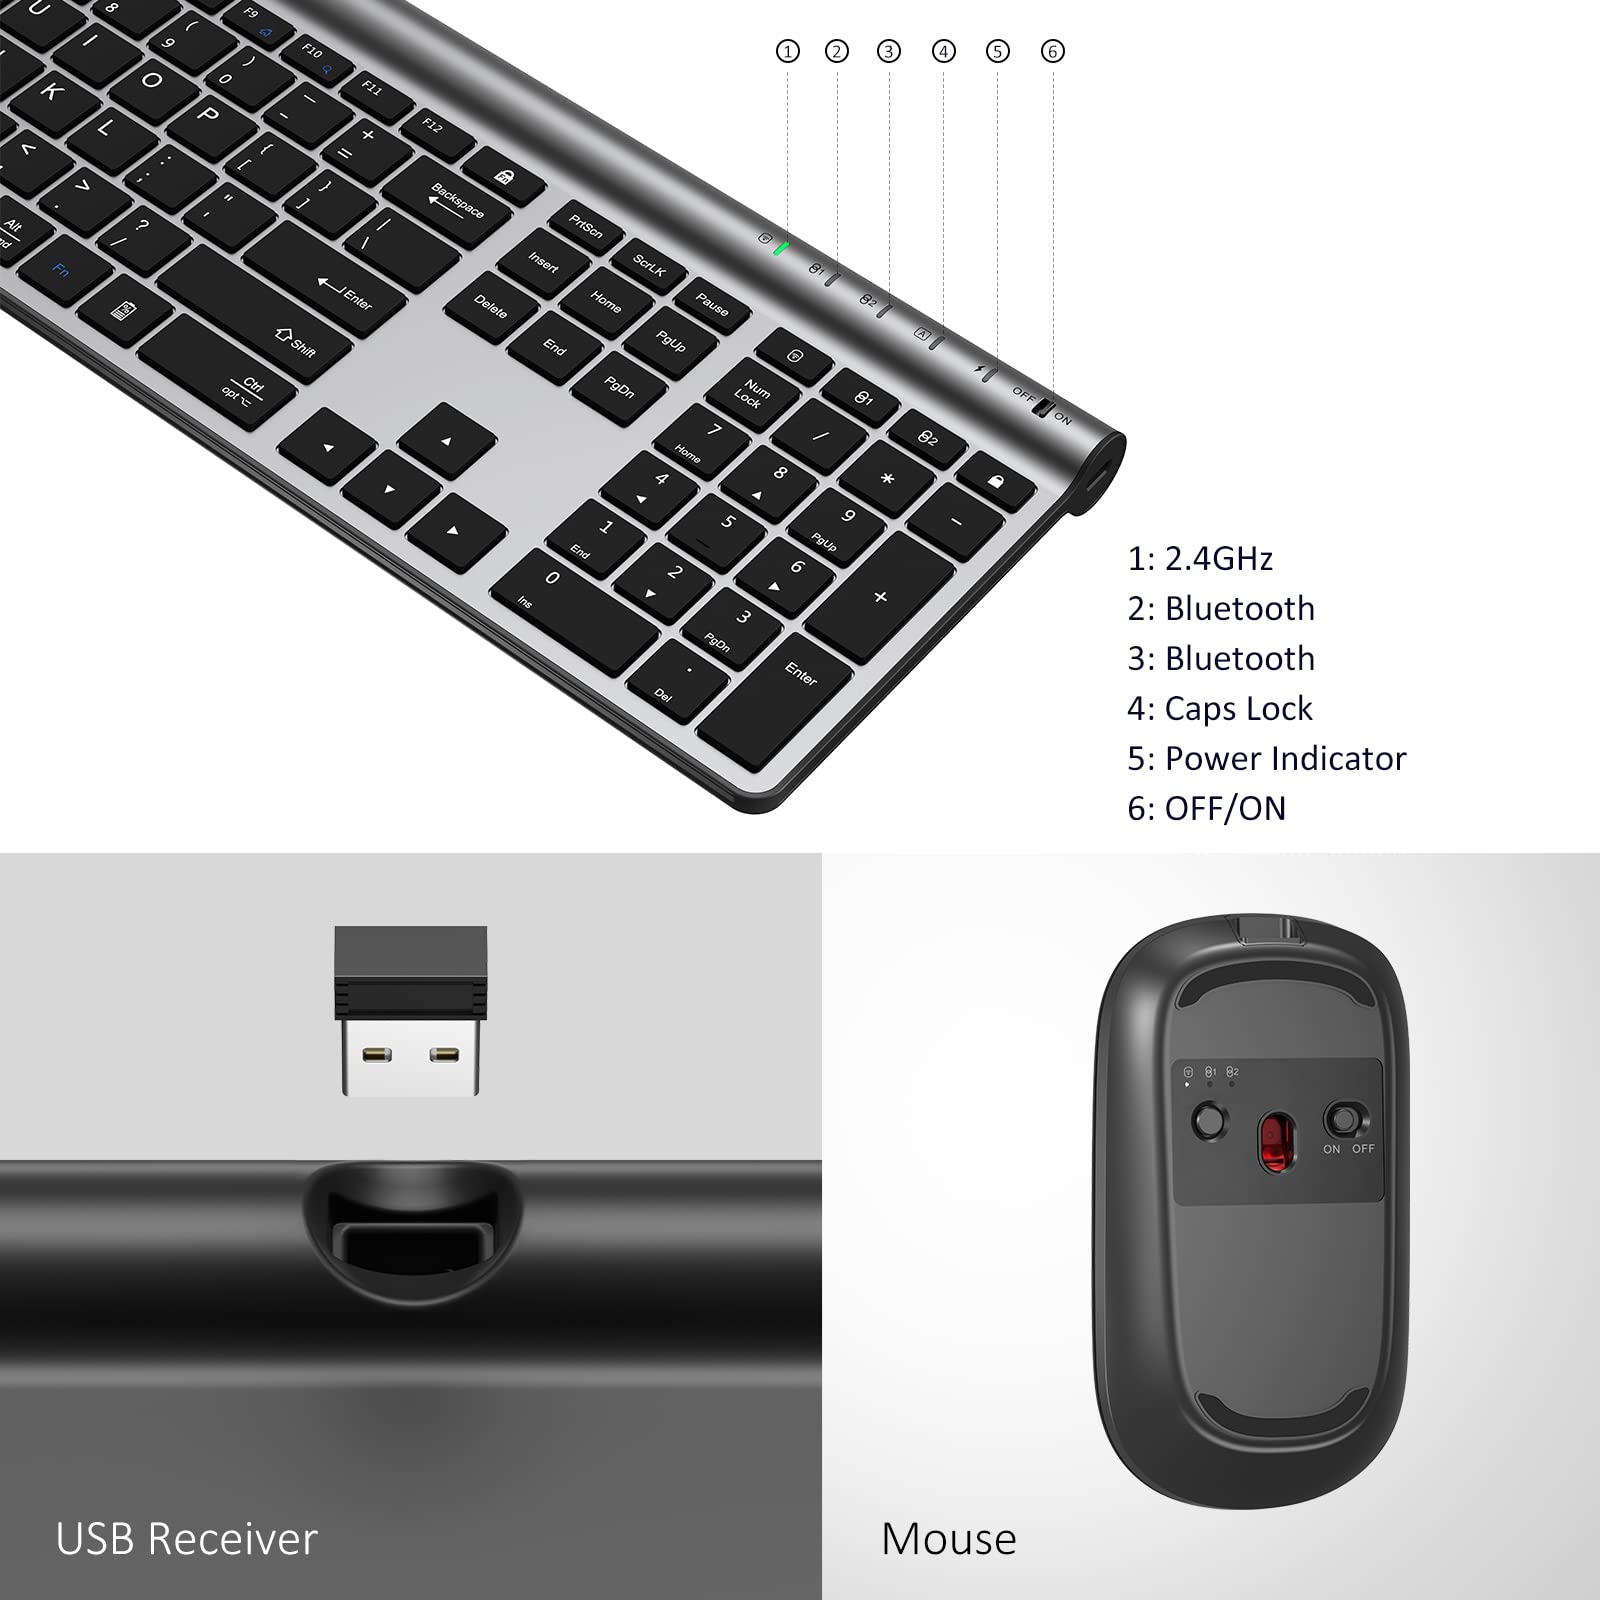 Wireless Keyboard and Mouse Combo, CHESONA Bluetooth Rechargeable Full Size Multi-Device (Bluetooth 5.0+3.0+2.4G) Wireless Keyboard Mouse Combo for Mac OS/iOS/Windows/Android (Silver Black)